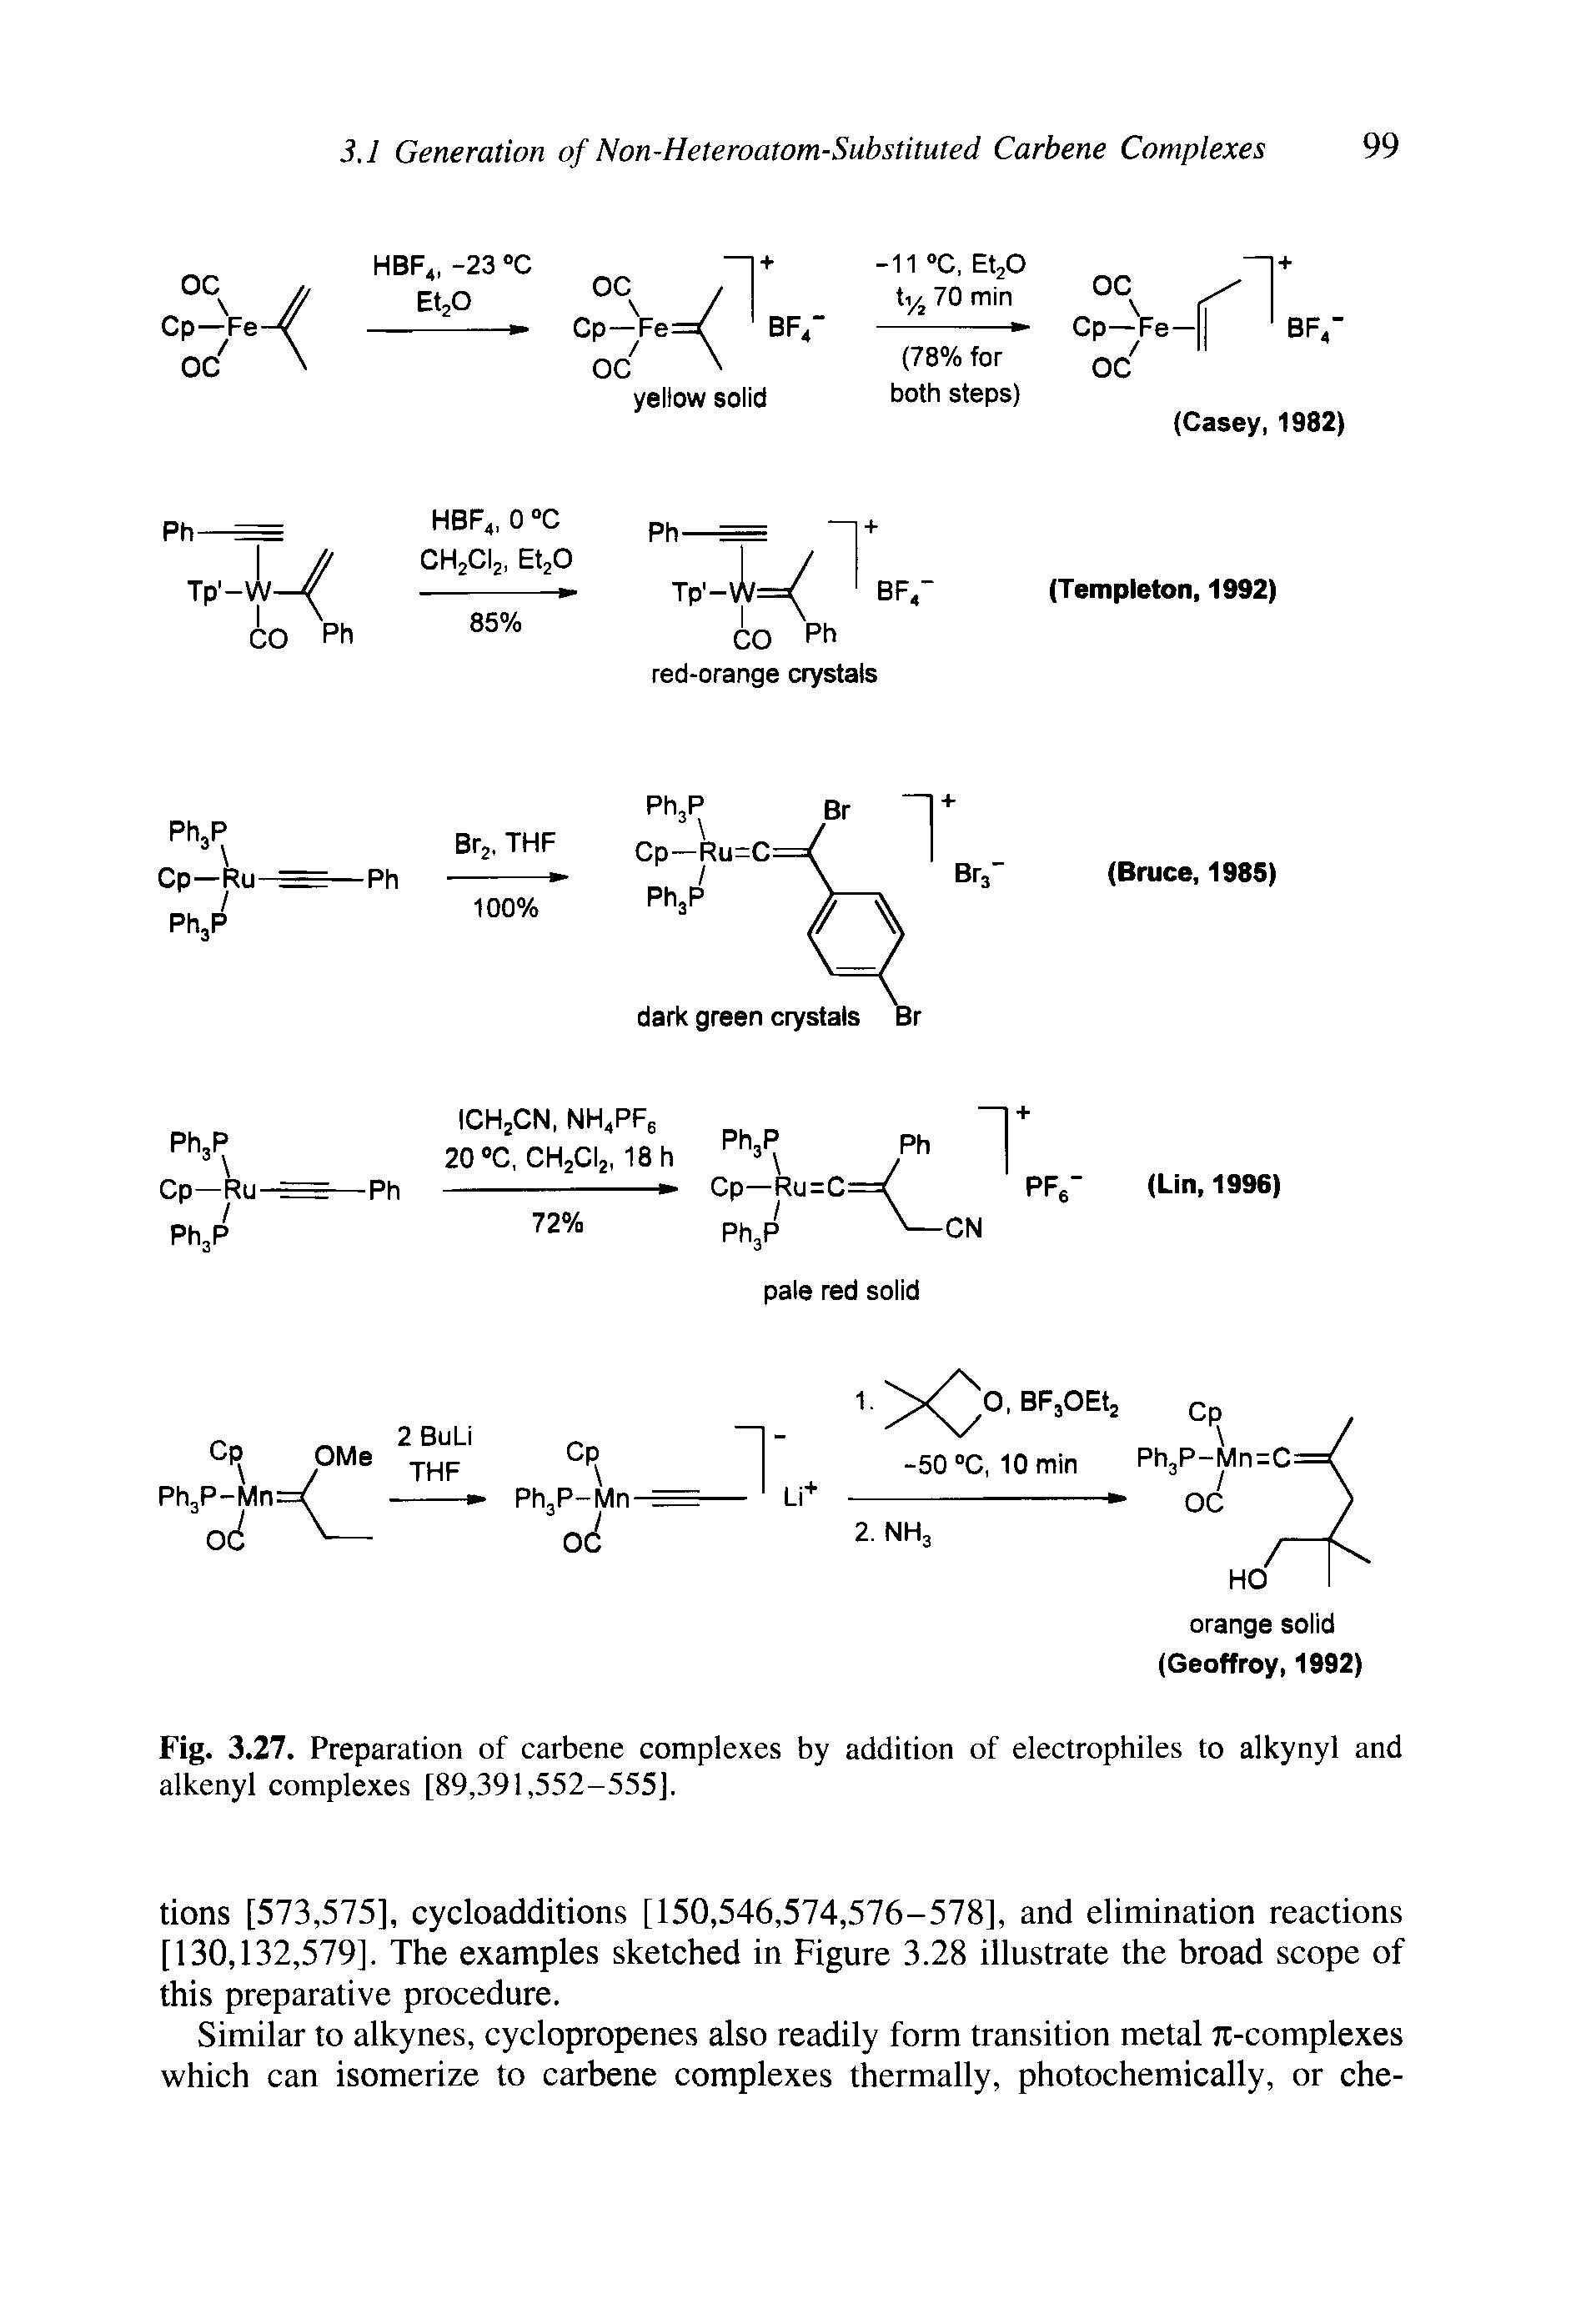 Fig. 3.27. Preparation of carbene complexes by addition of electrophiles to alkynyl and alkenyl complexes [89,391,552-555],...